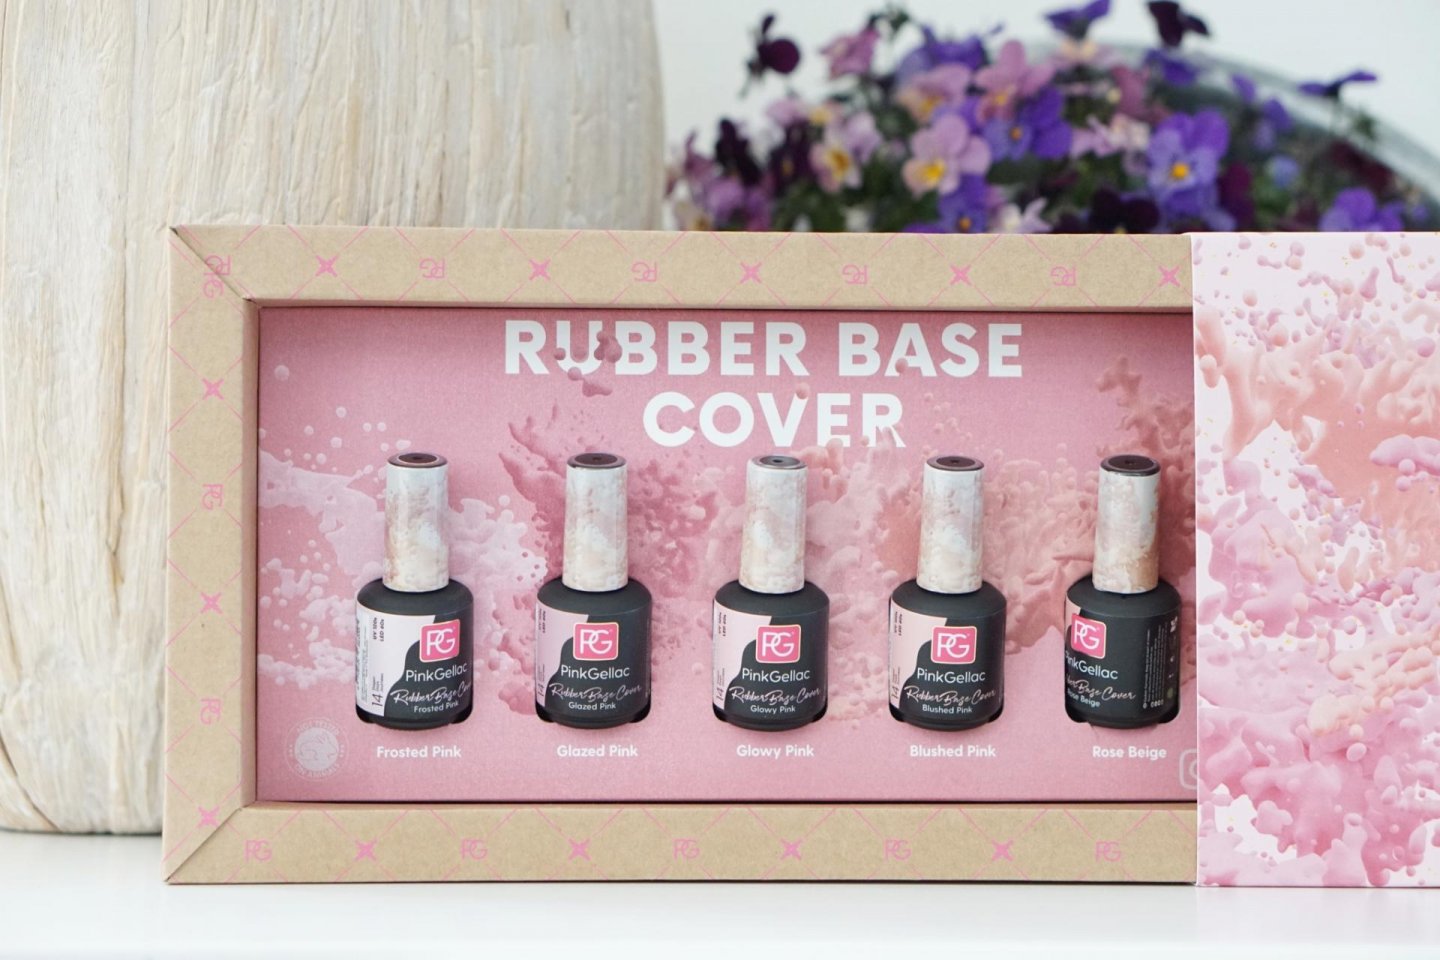 Pink Gellac Rubber Base Cover swatches